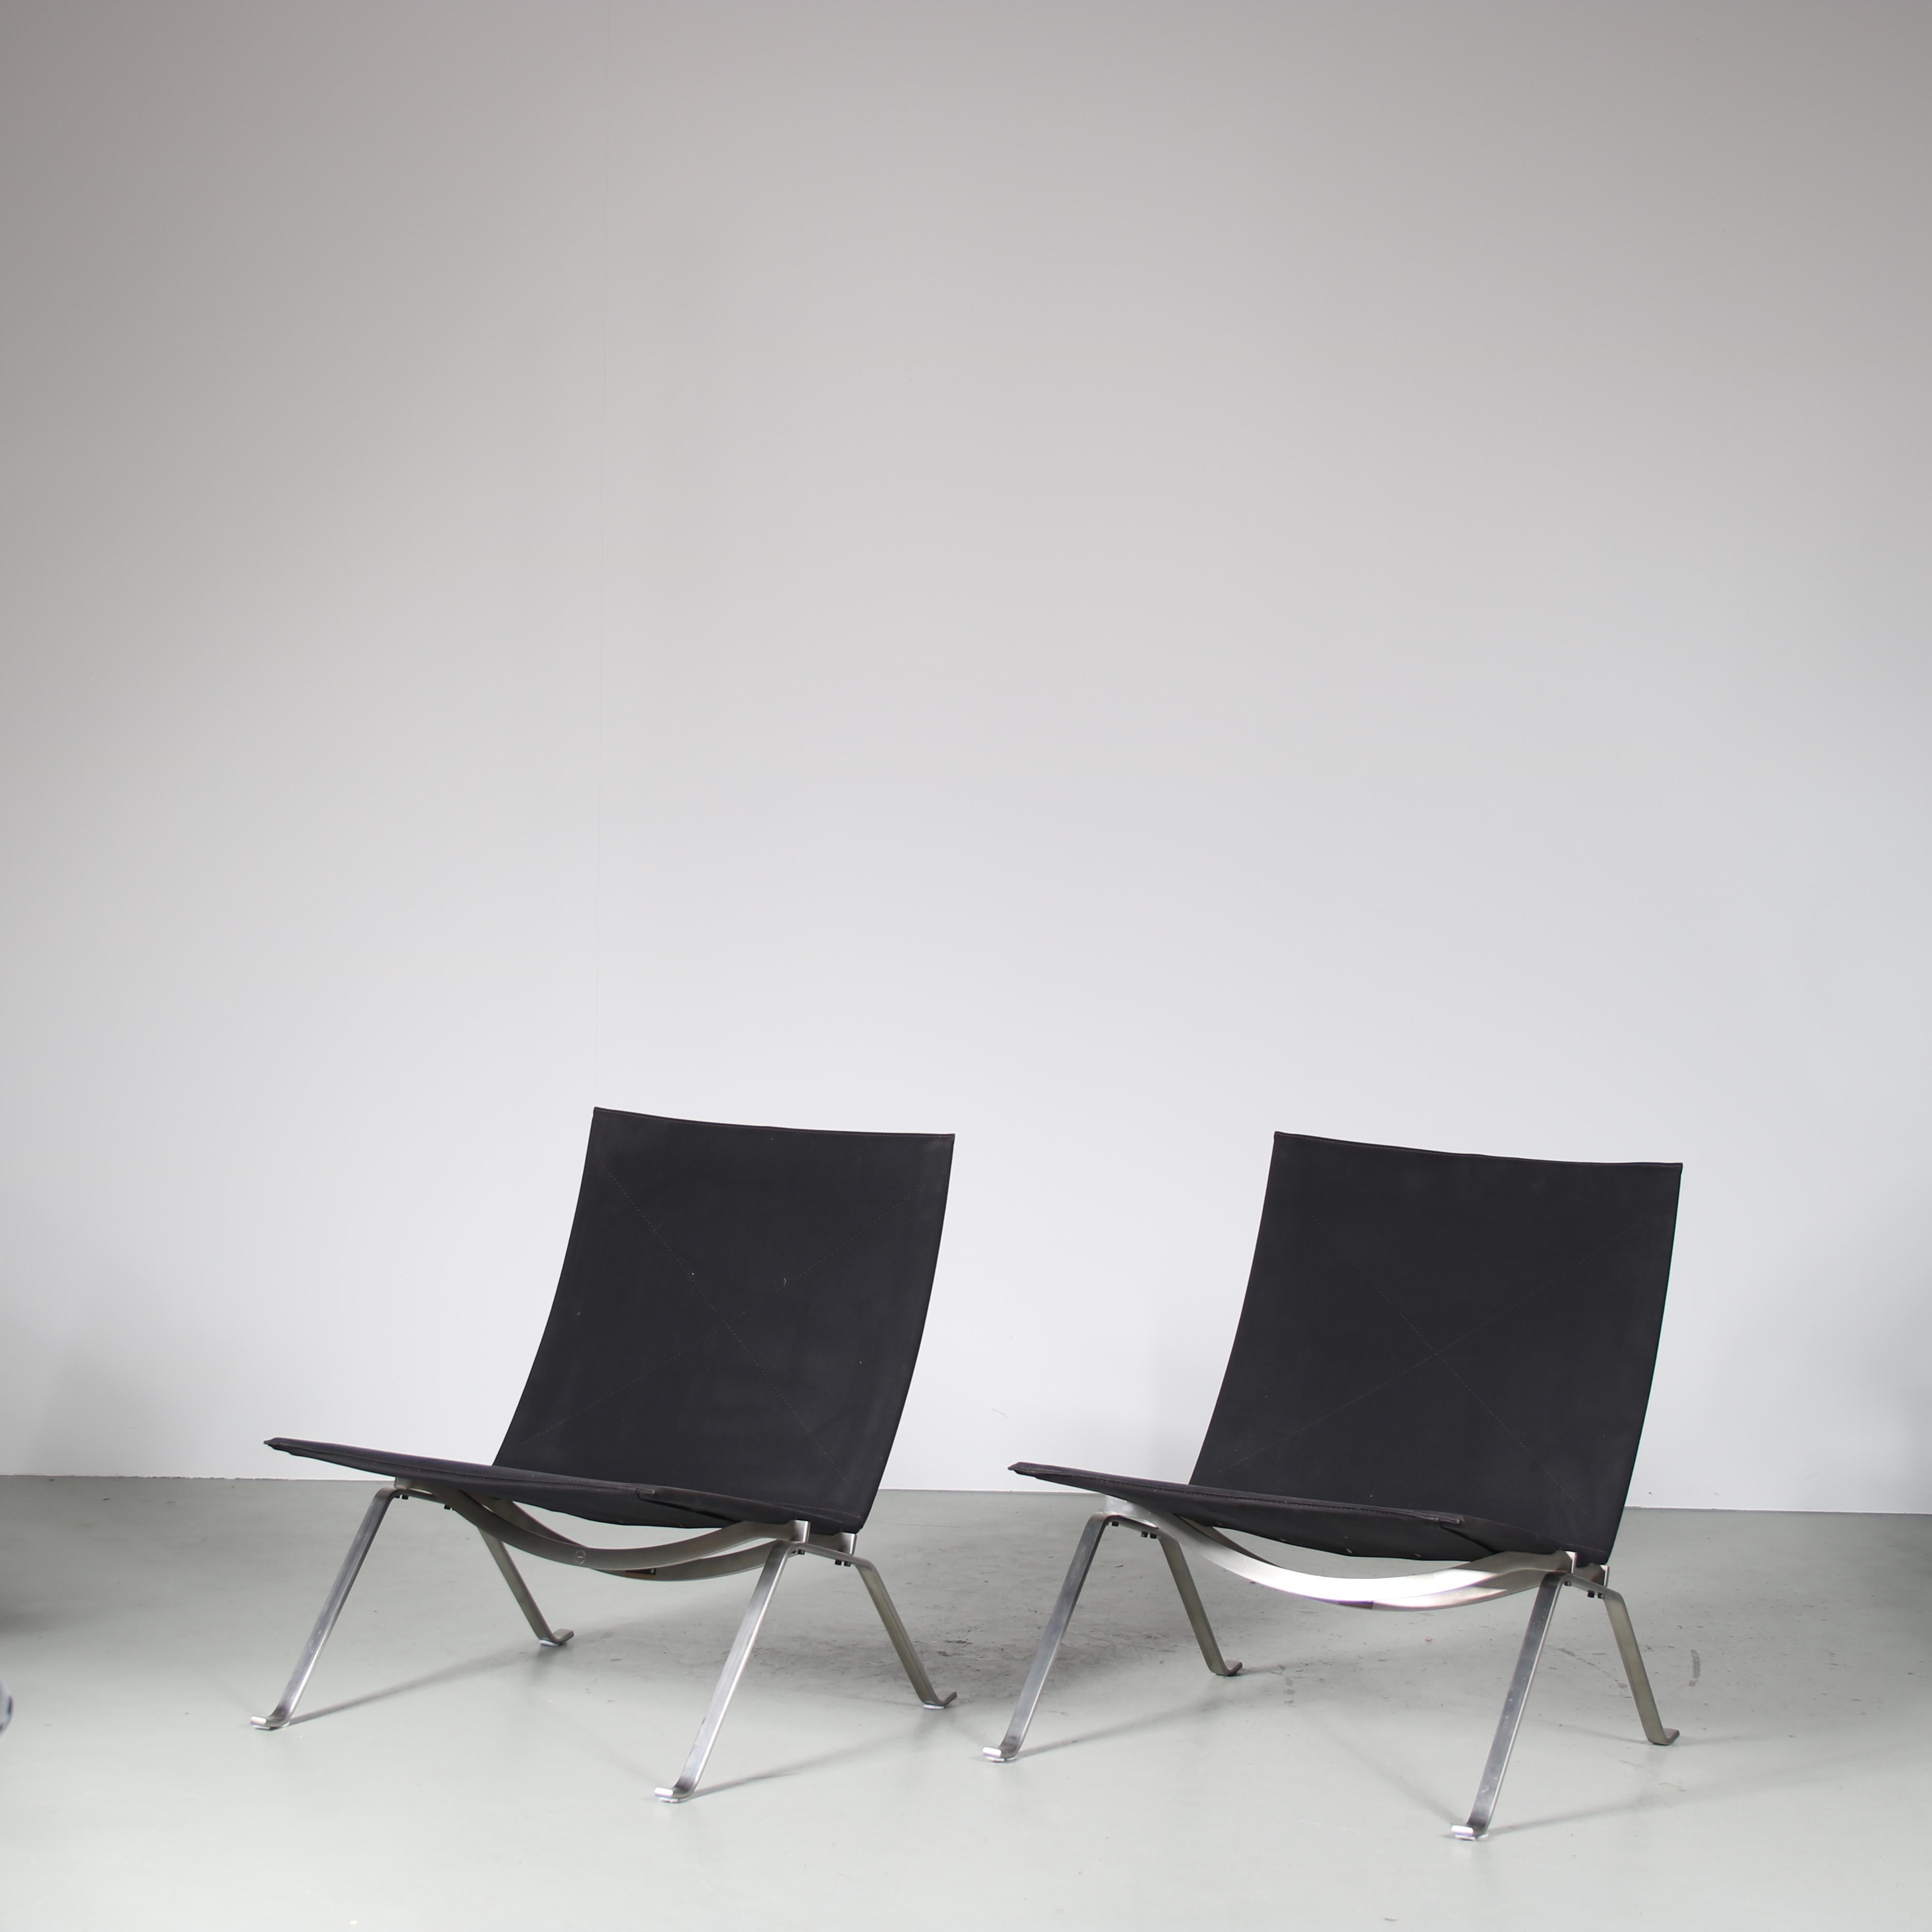 A stunning pair of PK22 lounge chairs designed by Poul Kjaerholm, manufactured by Fritz Hansen in Denmark in 2010.

This amazing set is made of high quality chrome plated metal holding a black canvas upholstered seat. This use of materials and the